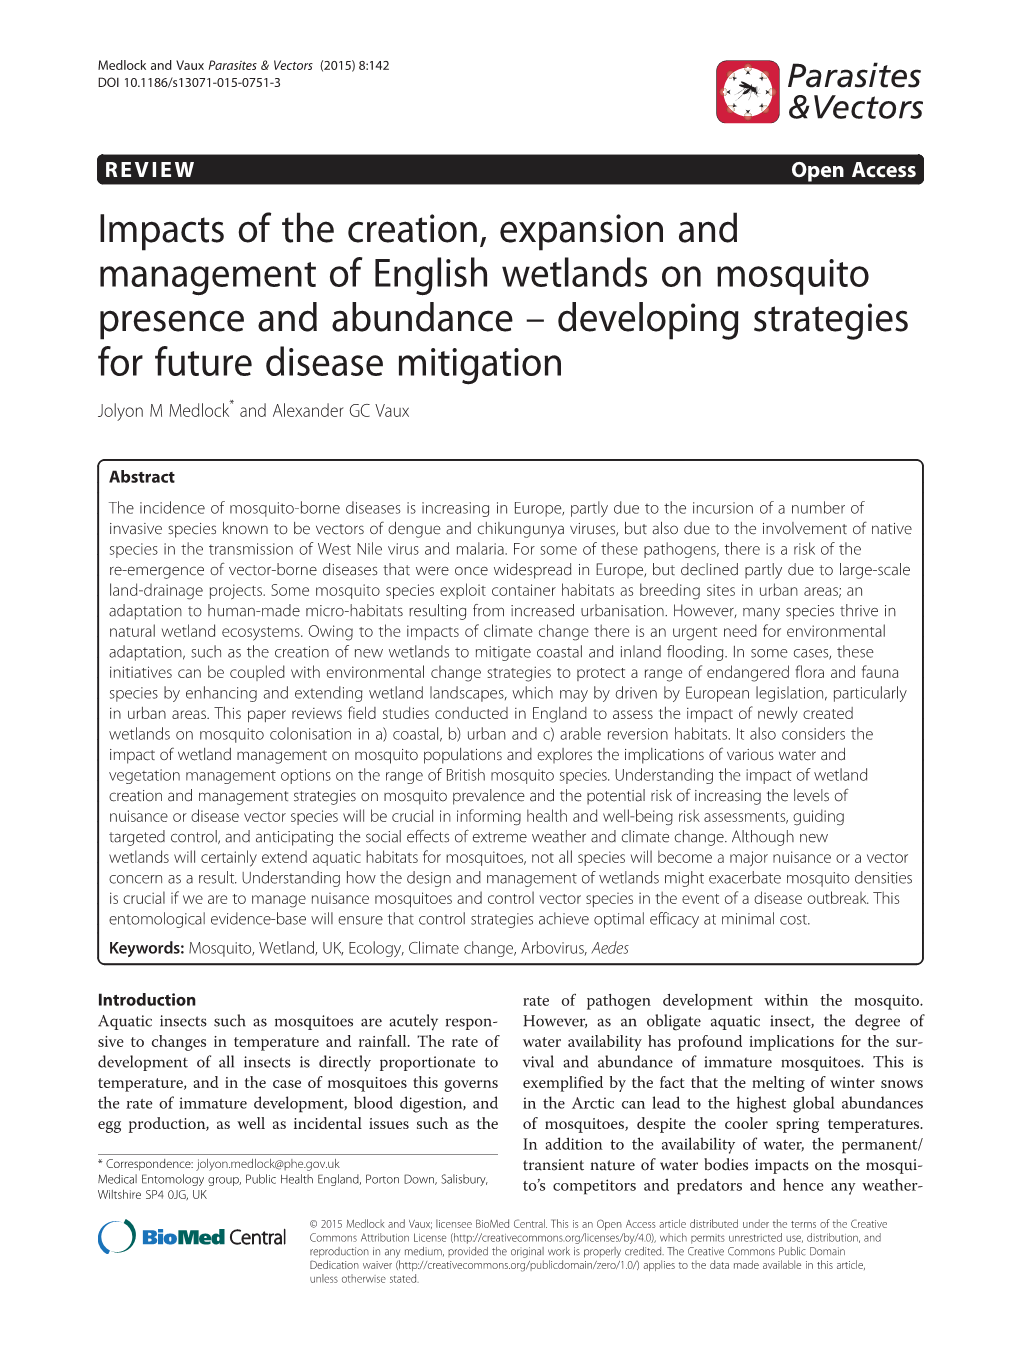 Impacts of the Creation, Expansion and Management of English Wetlands